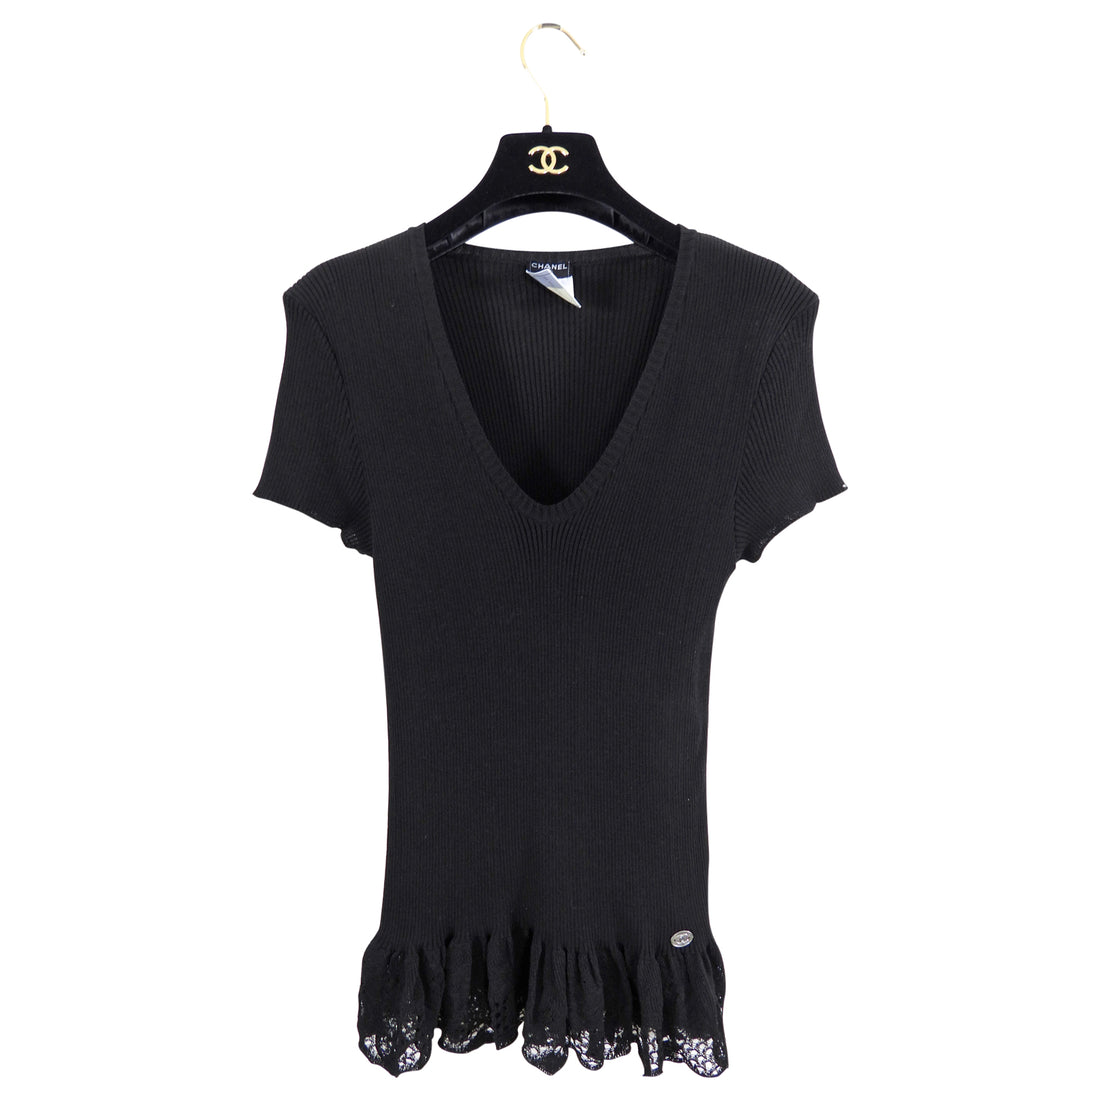 Chanel 06P Black Rib Knit Top with Lace Hem - FR42 (8/10) – I MISS YOU  VINTAGE